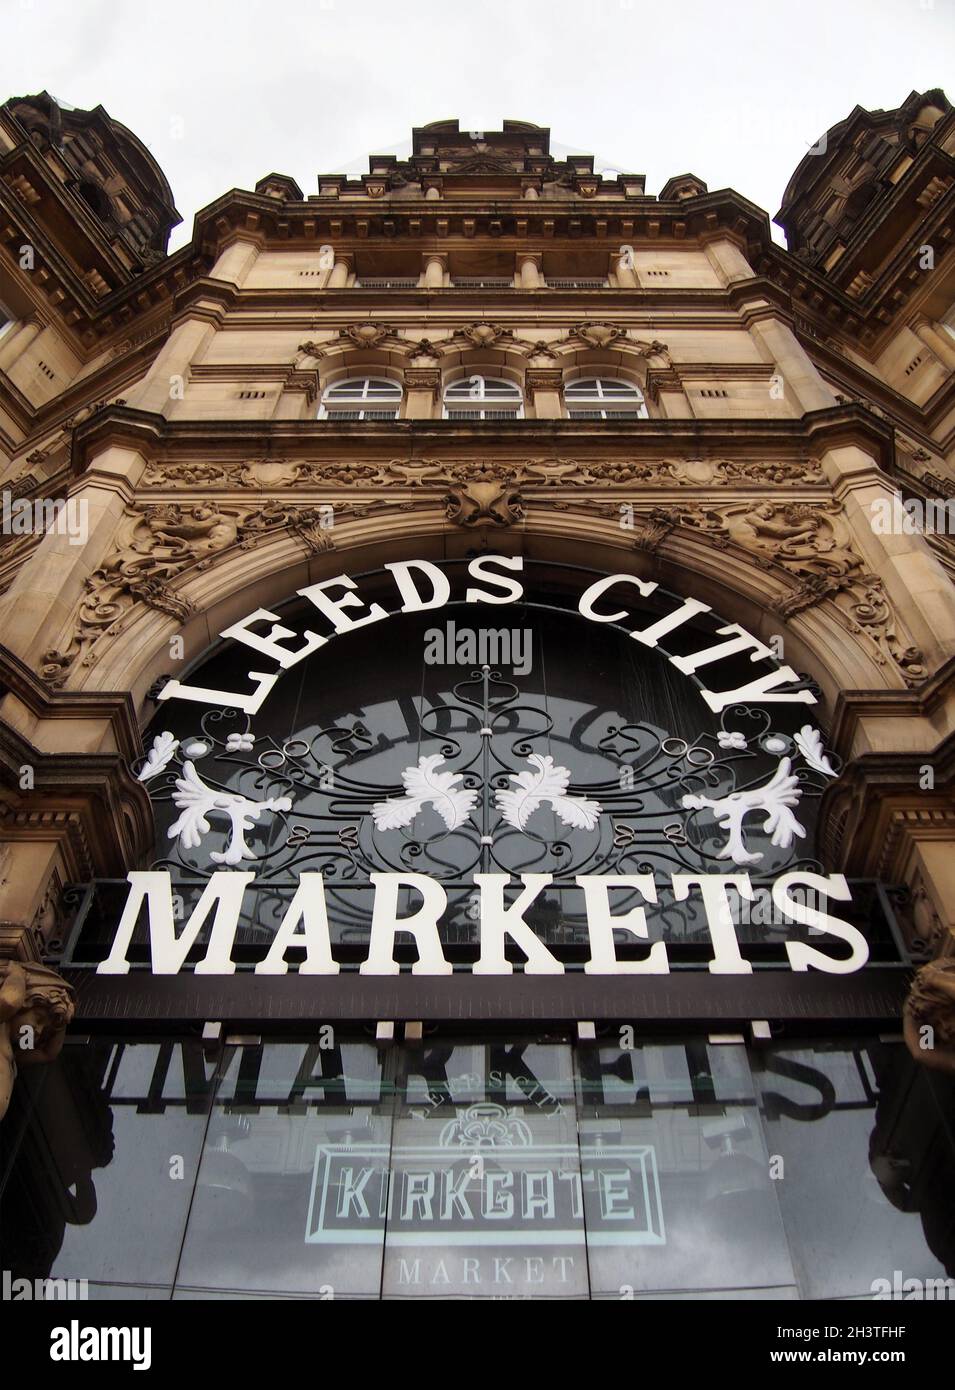 Sign over the entrance to Leeds city markets, a historic covered market building in Leeds, west yorkshire Stock Photo